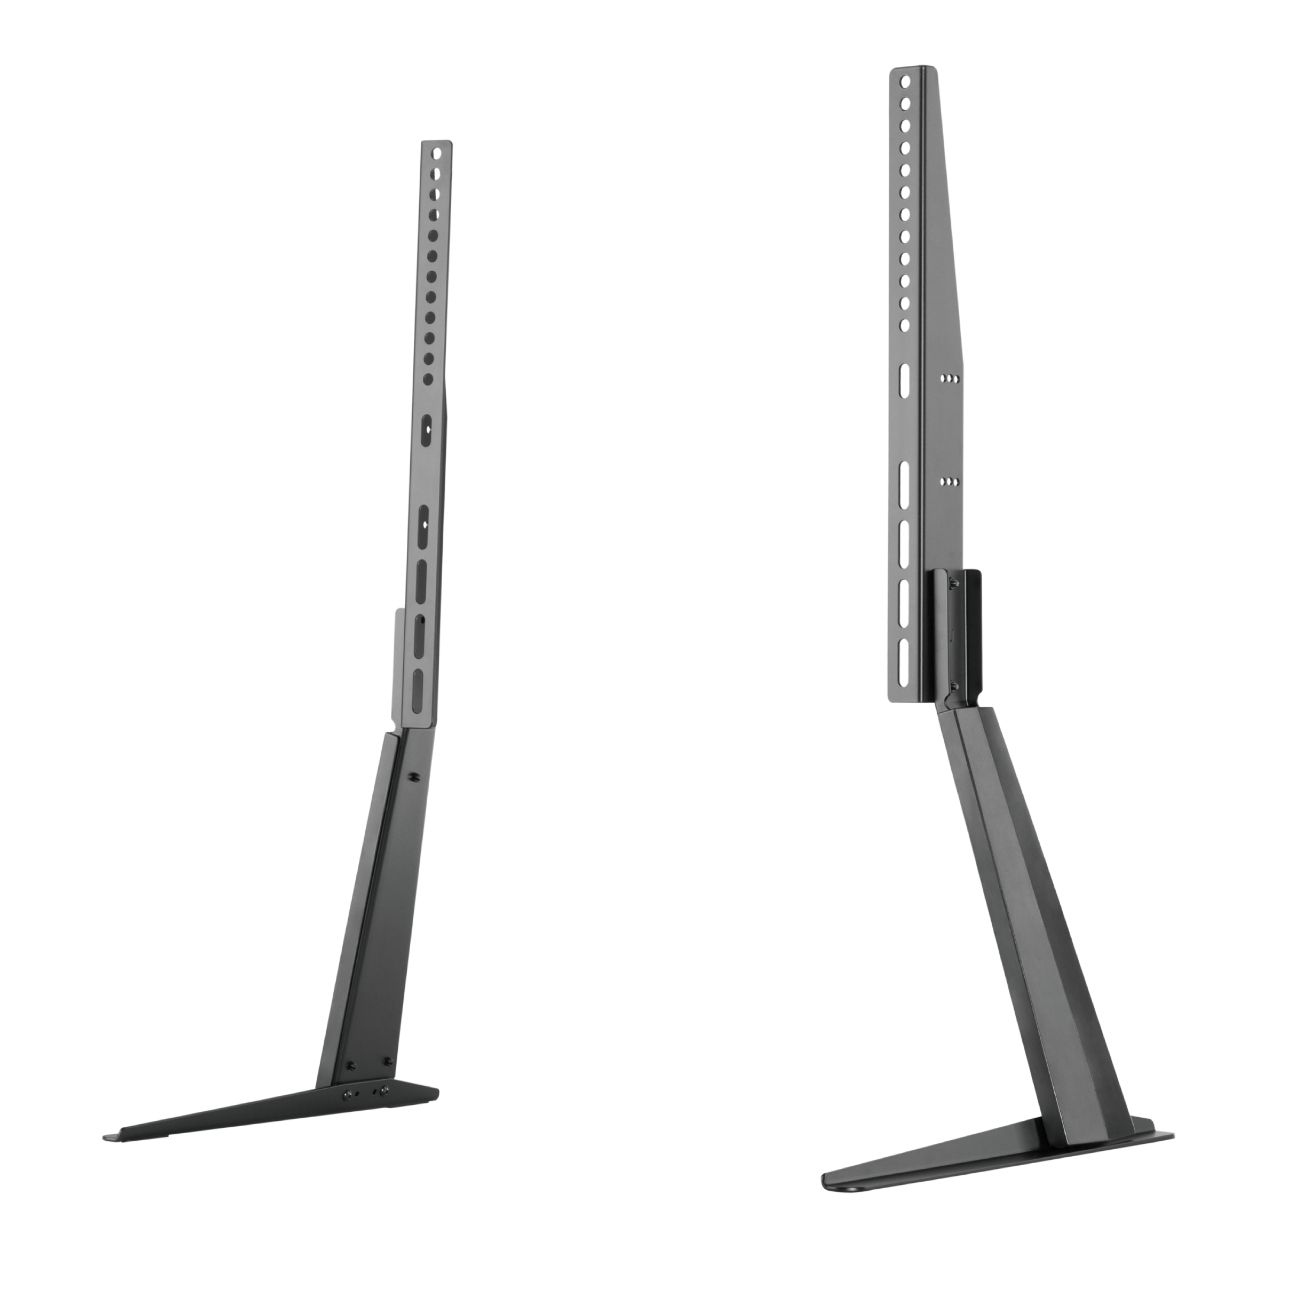 Pro 3270 – Universal Table Stand For Led Display 32" To 70" (jl41880 –  Jl41880) – Gbc Elettronica Throughout Universal Tabletop Tv Stands (Gallery 12 of 20)